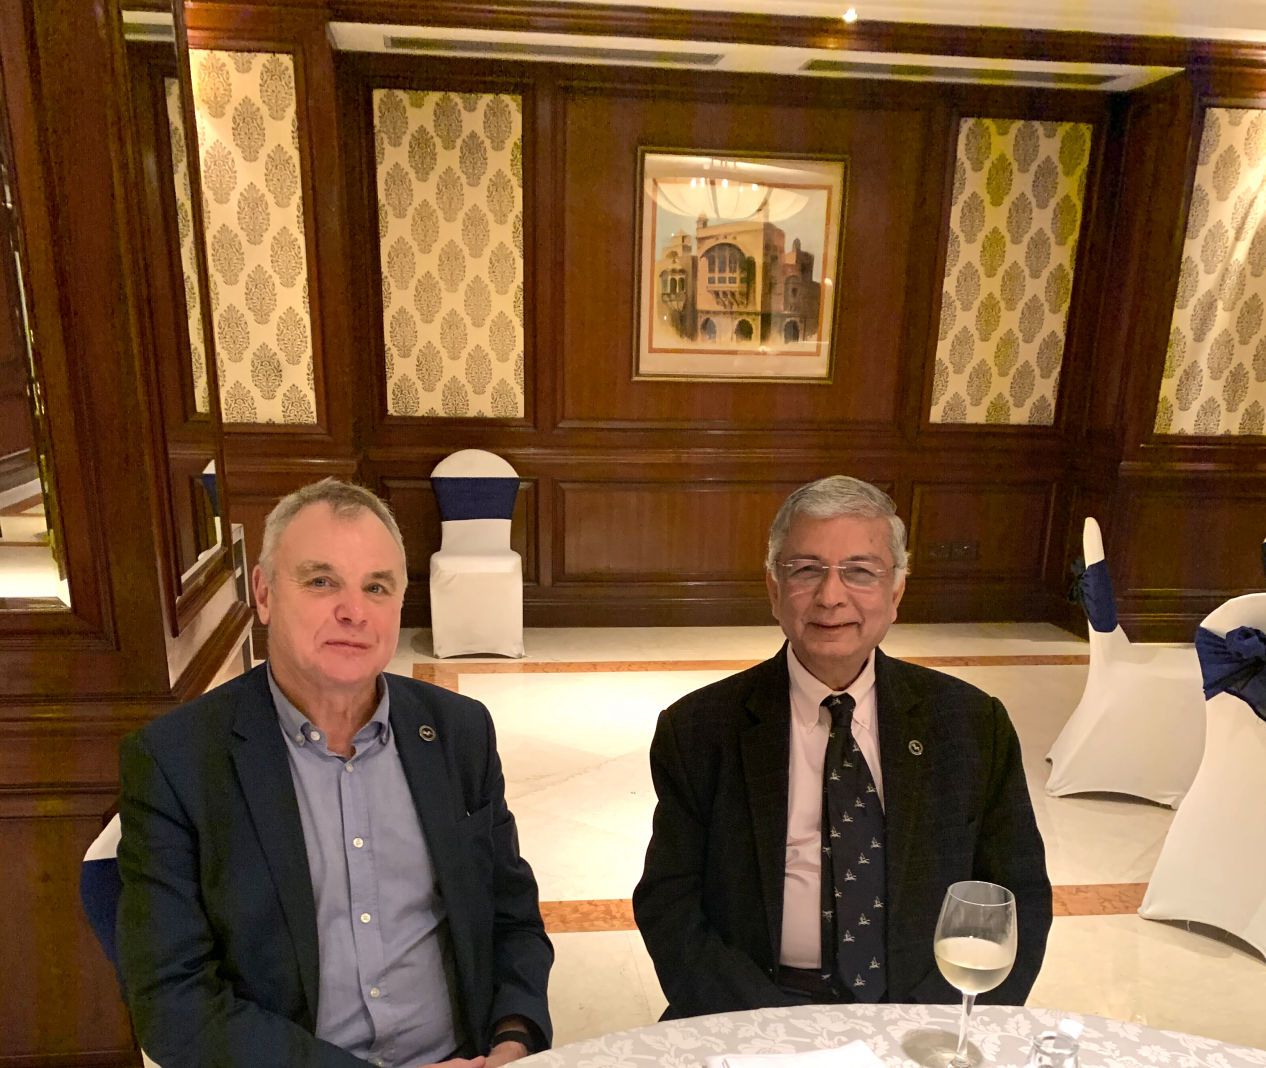 Dr. Ashok Sarin with Prof. Derek Bell, President Royal College of Physicians, Edinburgh at a Symposium on 11th January, 2020 in New Delhi.